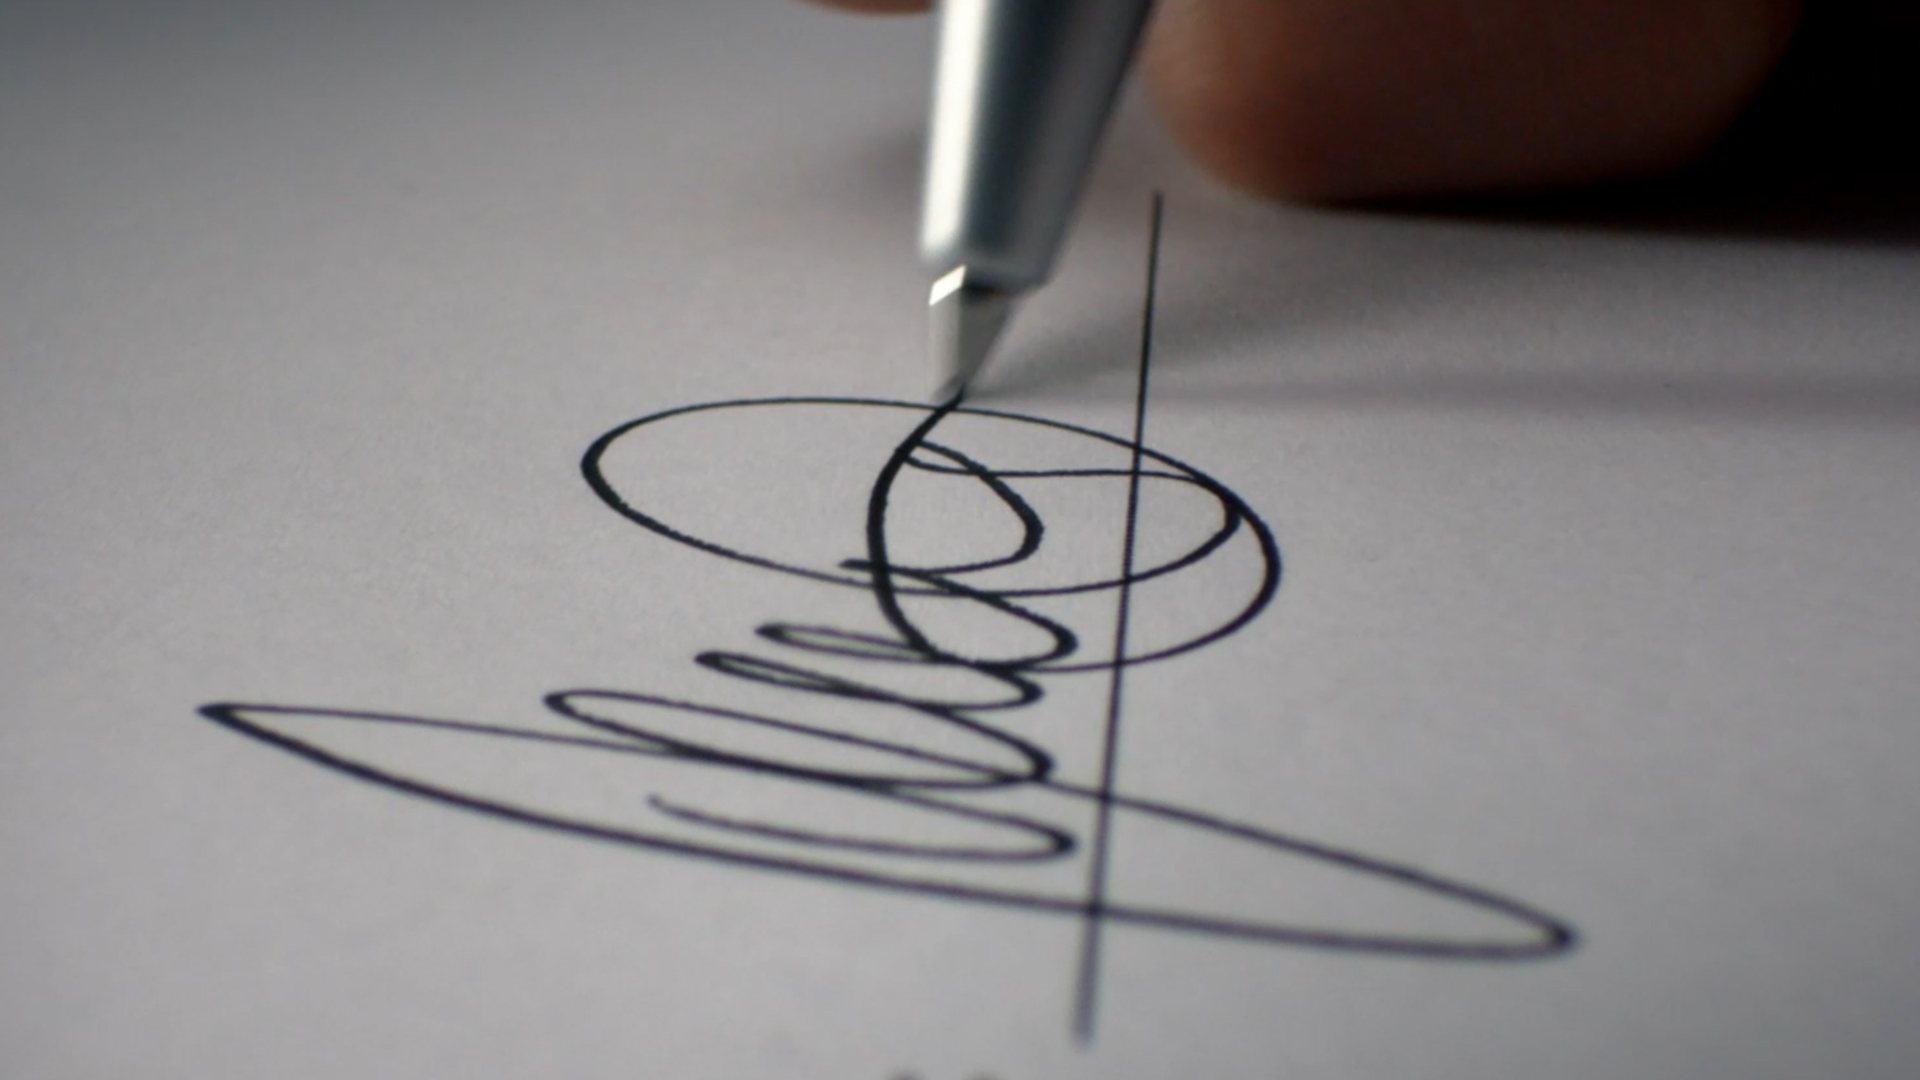 Still from the VANDAL produced Audi Choice TVC featuring the tip of a pen placing a signature on paper